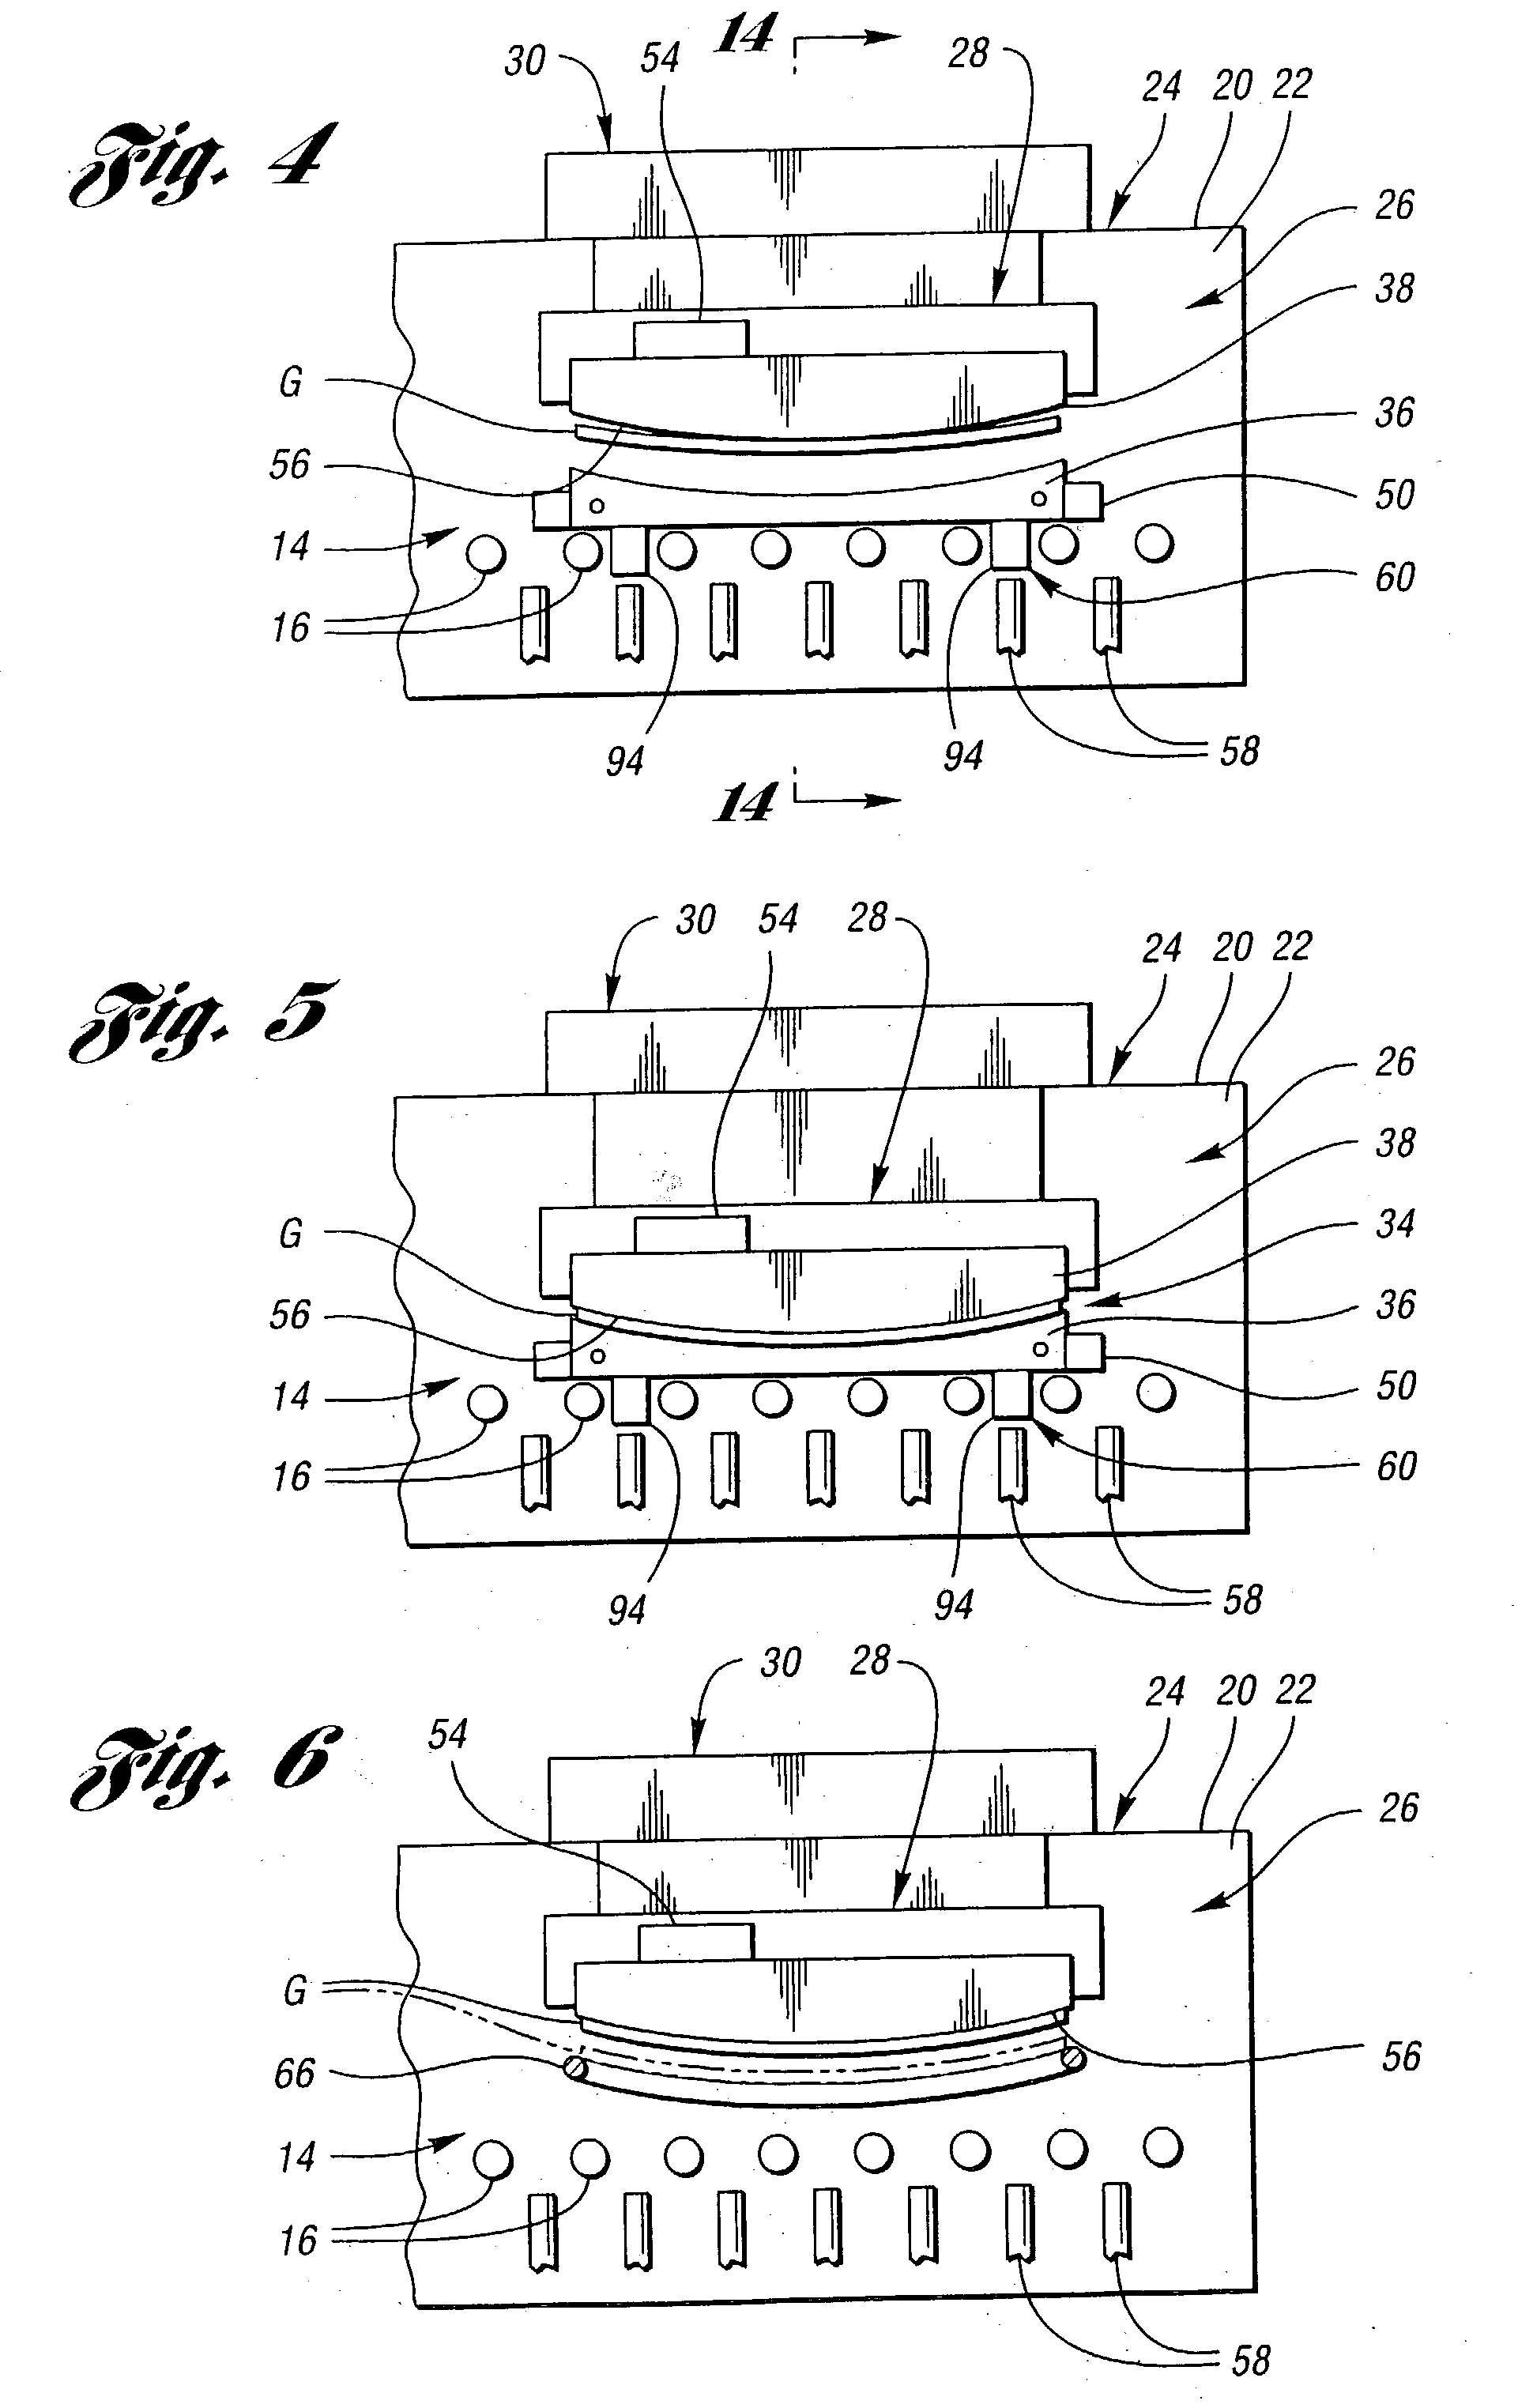 Method for forming heated glass sheets